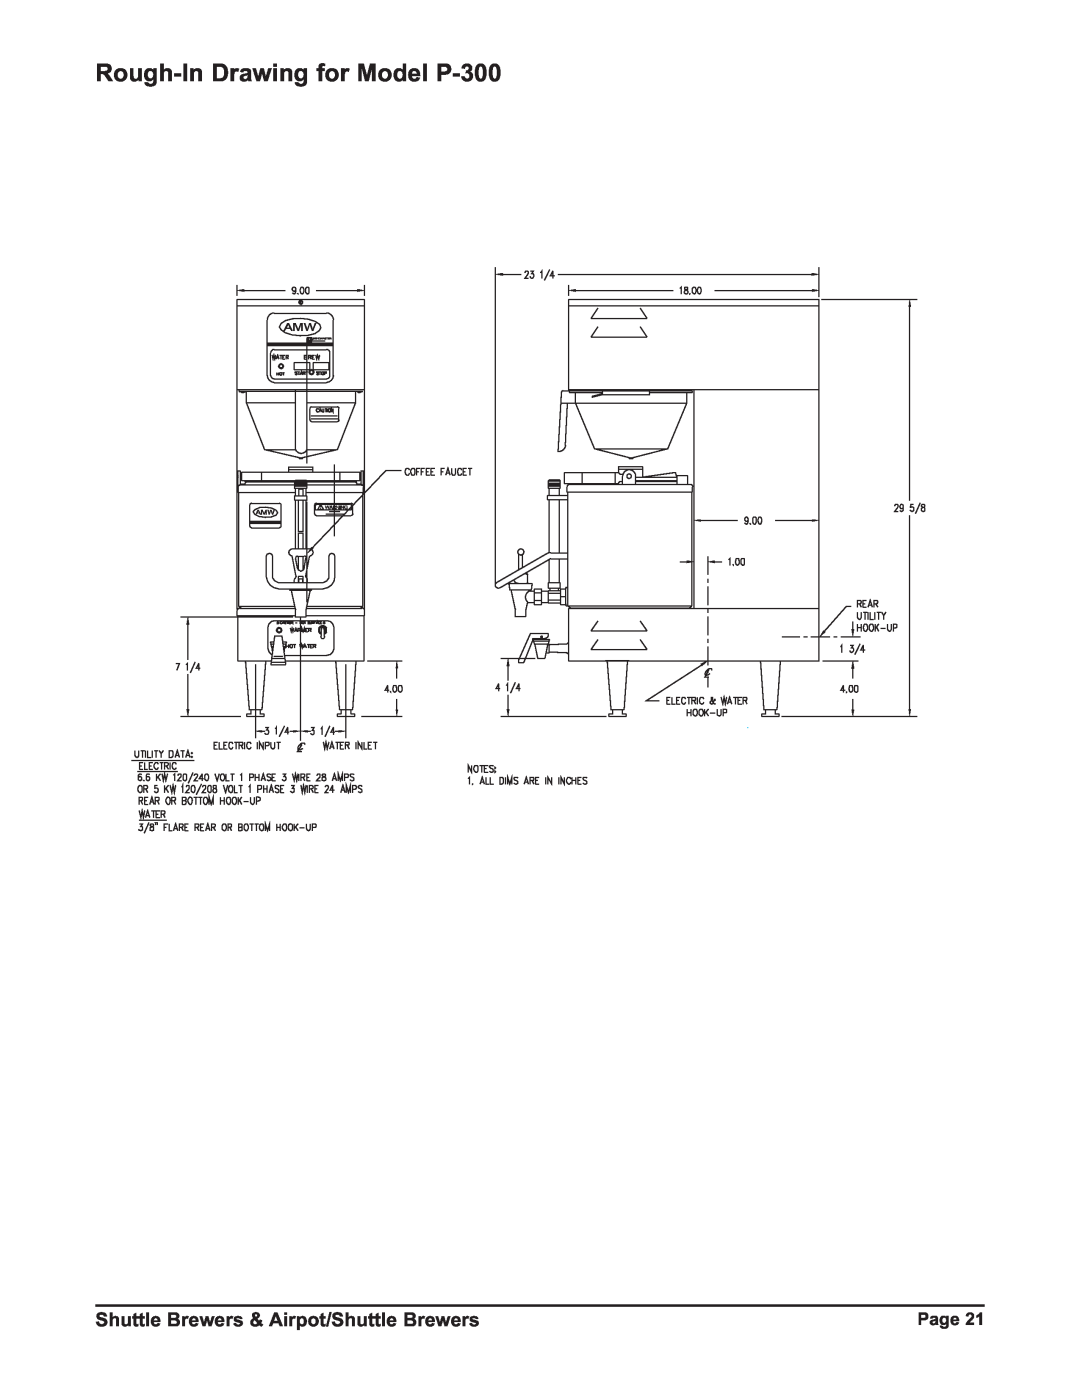 Grindmaster P400ESHP instruction manual Rough-In Drawing for Model P-300, Shuttle Brewers & Airpot/Shuttle Brewers 